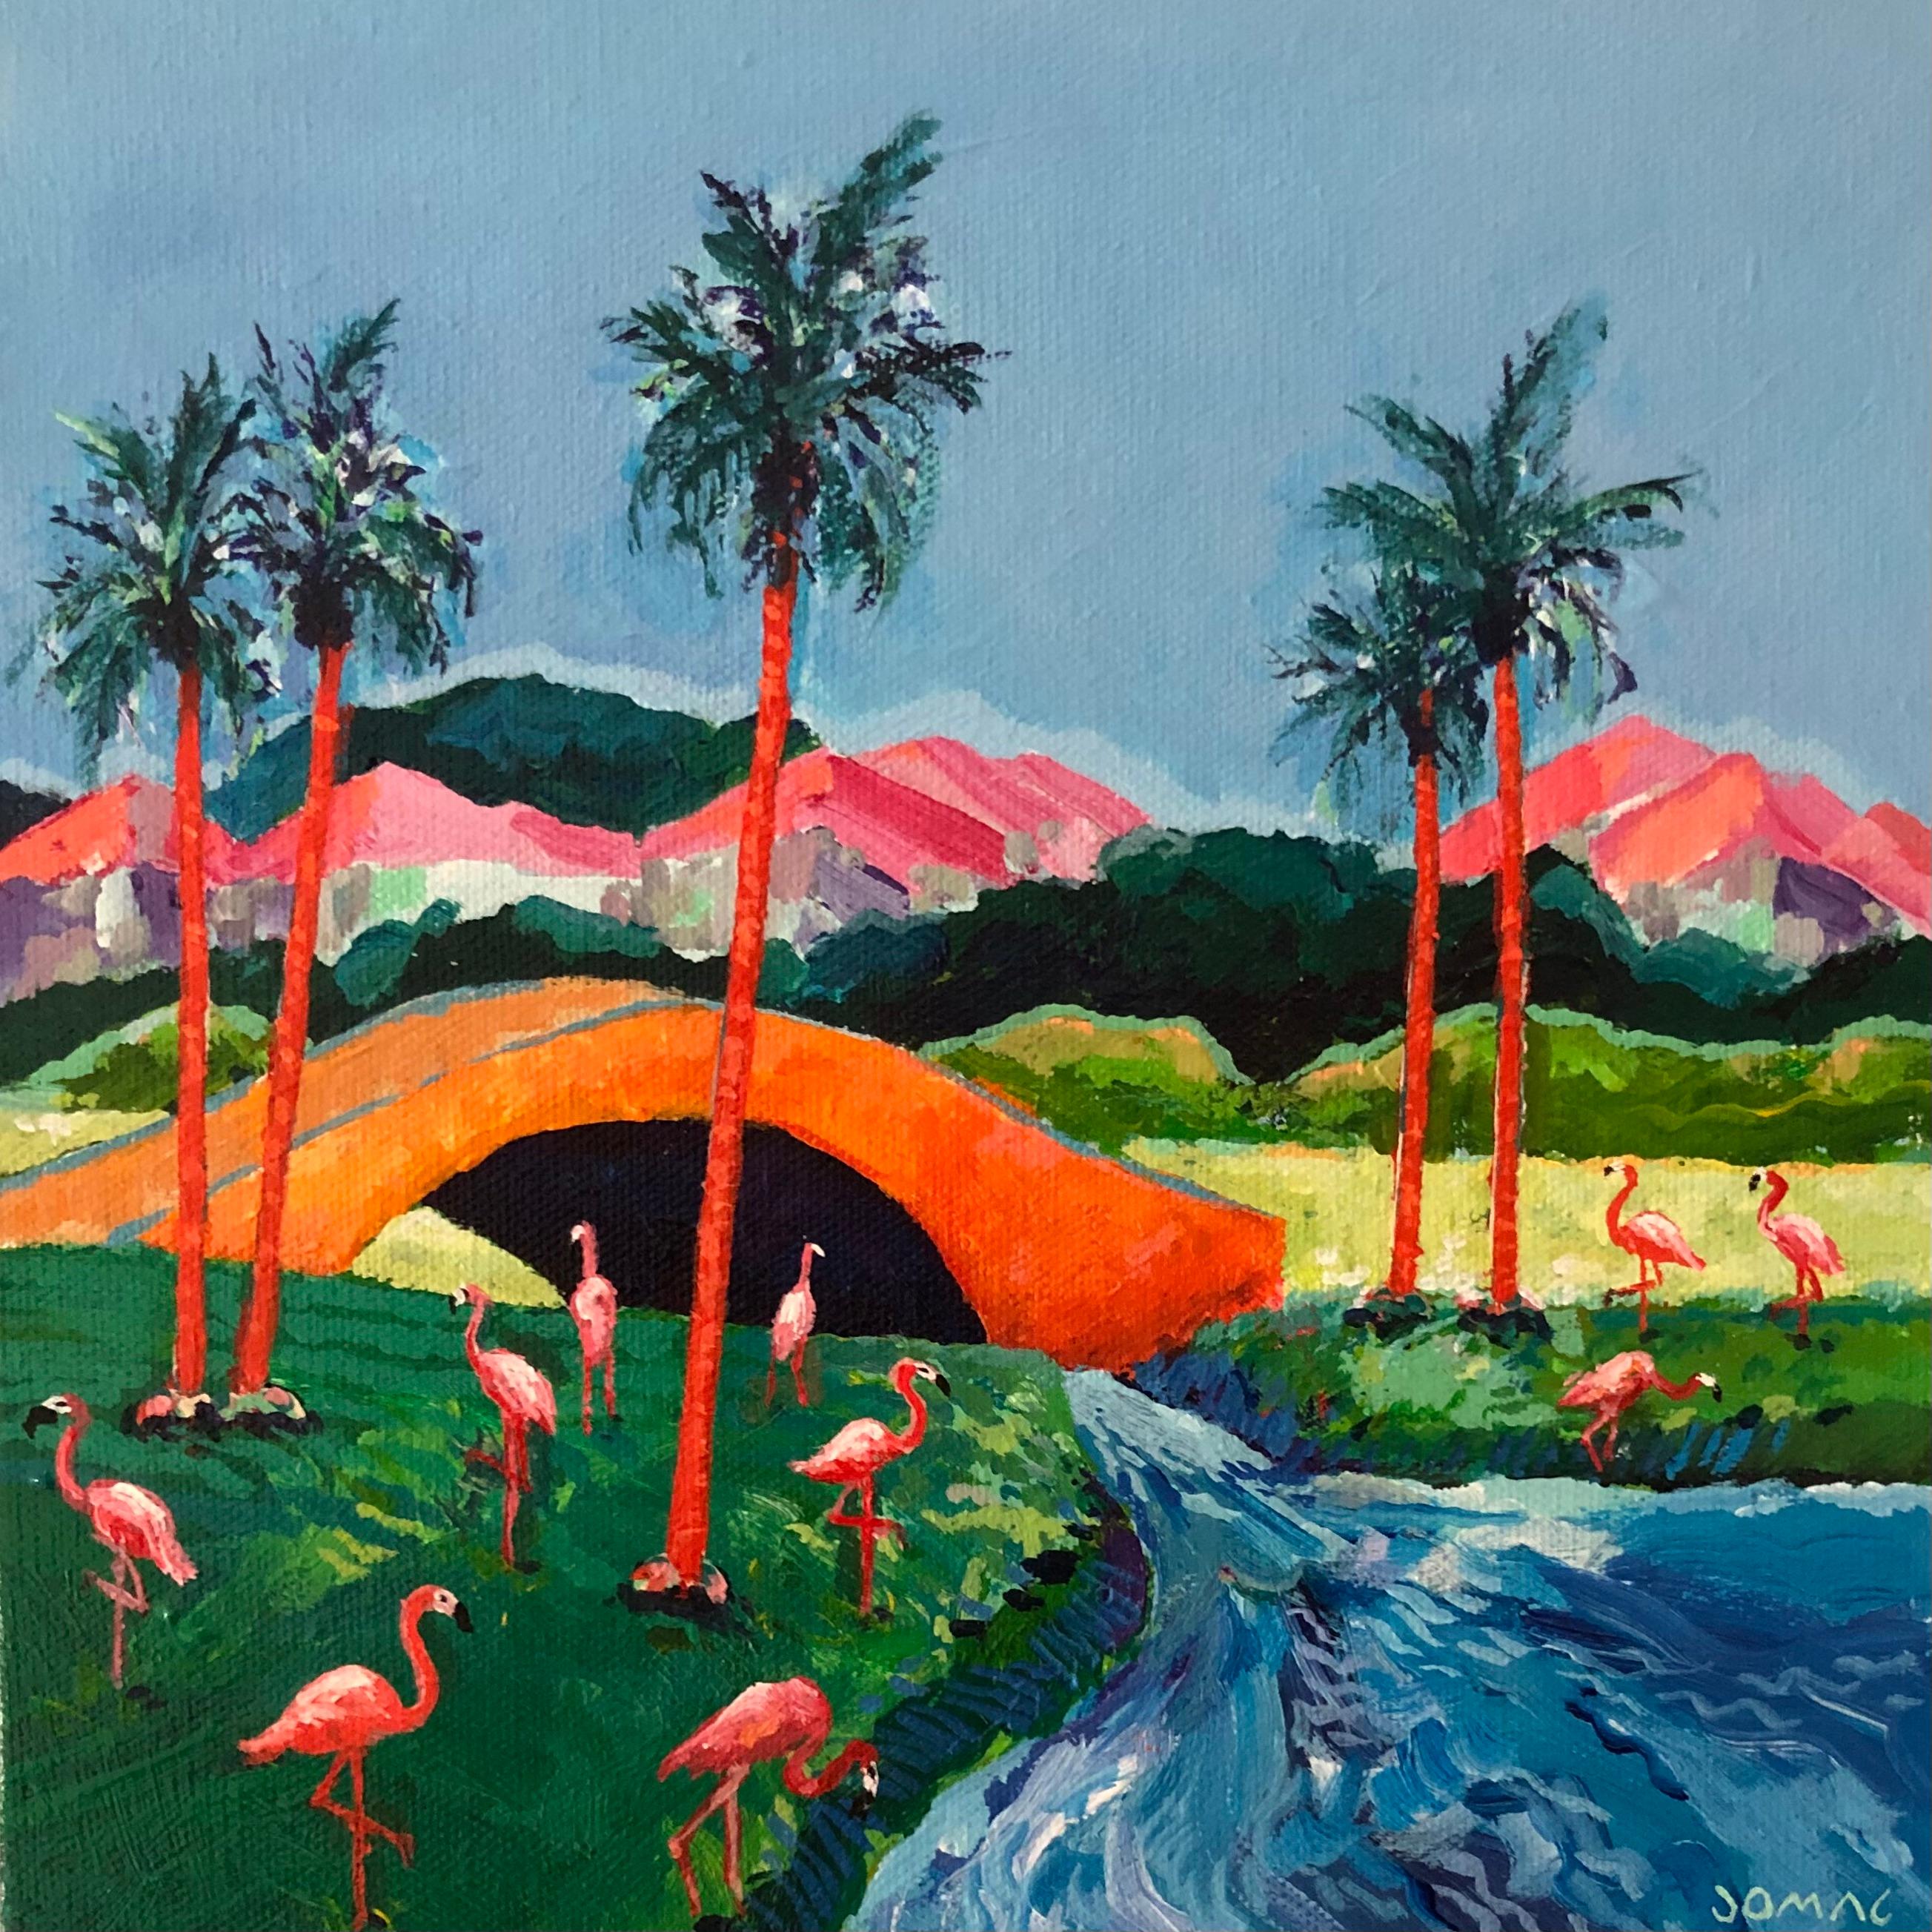 Joseph McAleer Landscape Painting - Fauve Flamingos: birds in landscape w/ blue water, pink mountains, palm trees